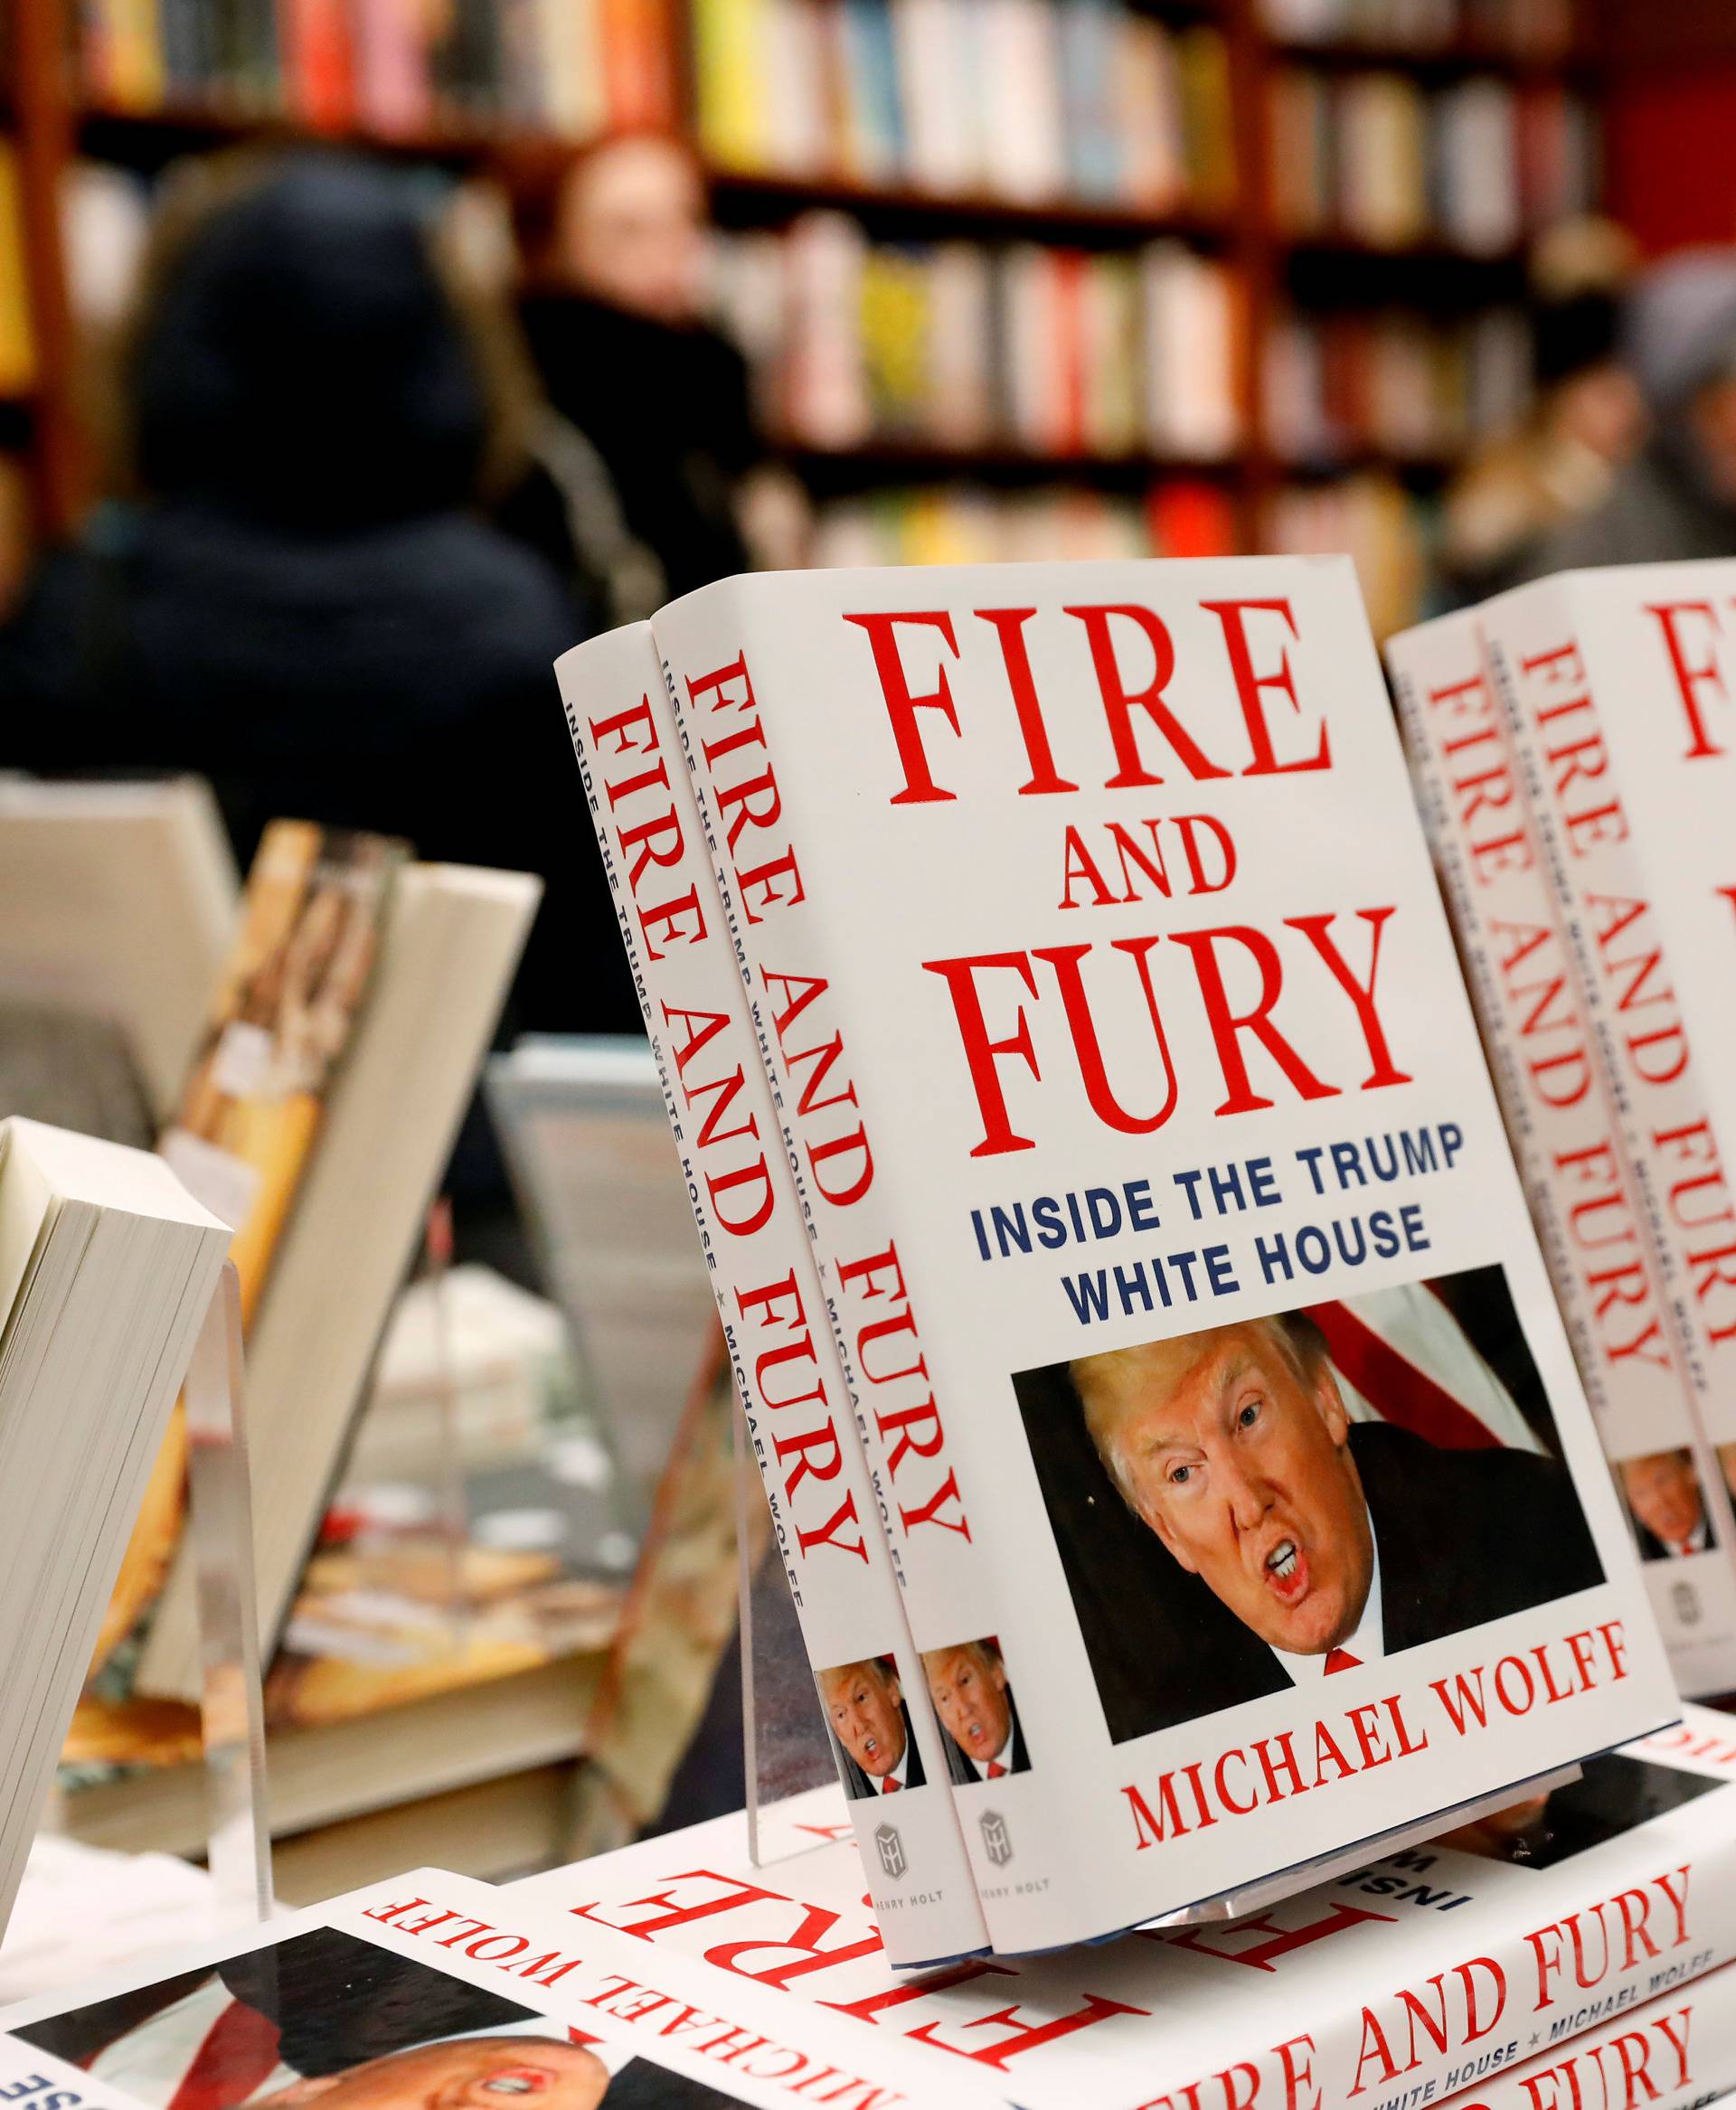 Copies of the book "Fire and Fury: Inside the Trump White House" by author Michael Wolff are seen at the Book Culture book store in New York